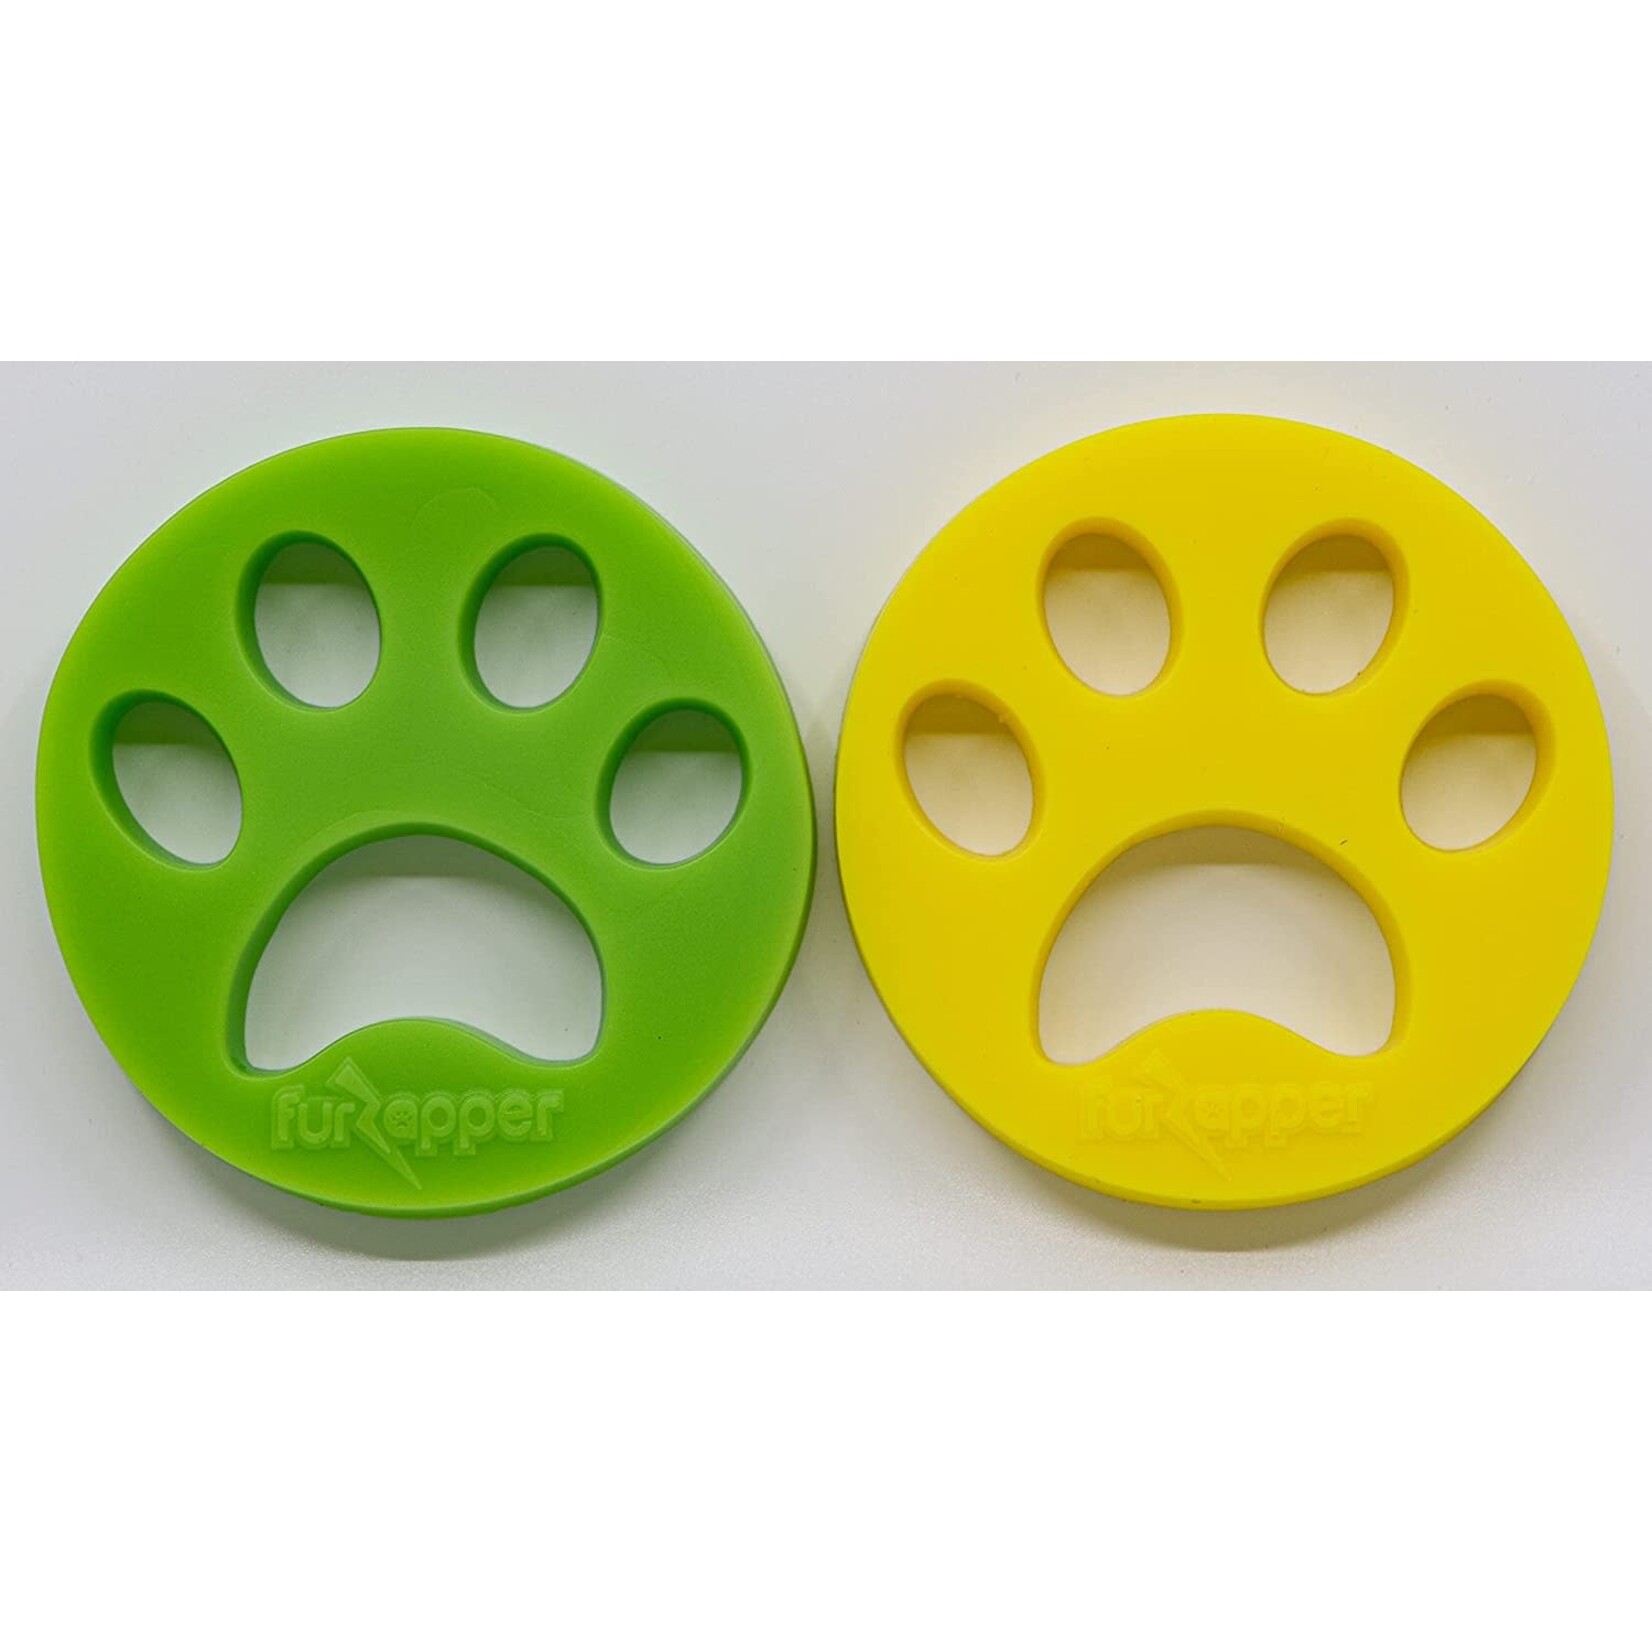 FurZapper Pet Hair Remover pack of 2